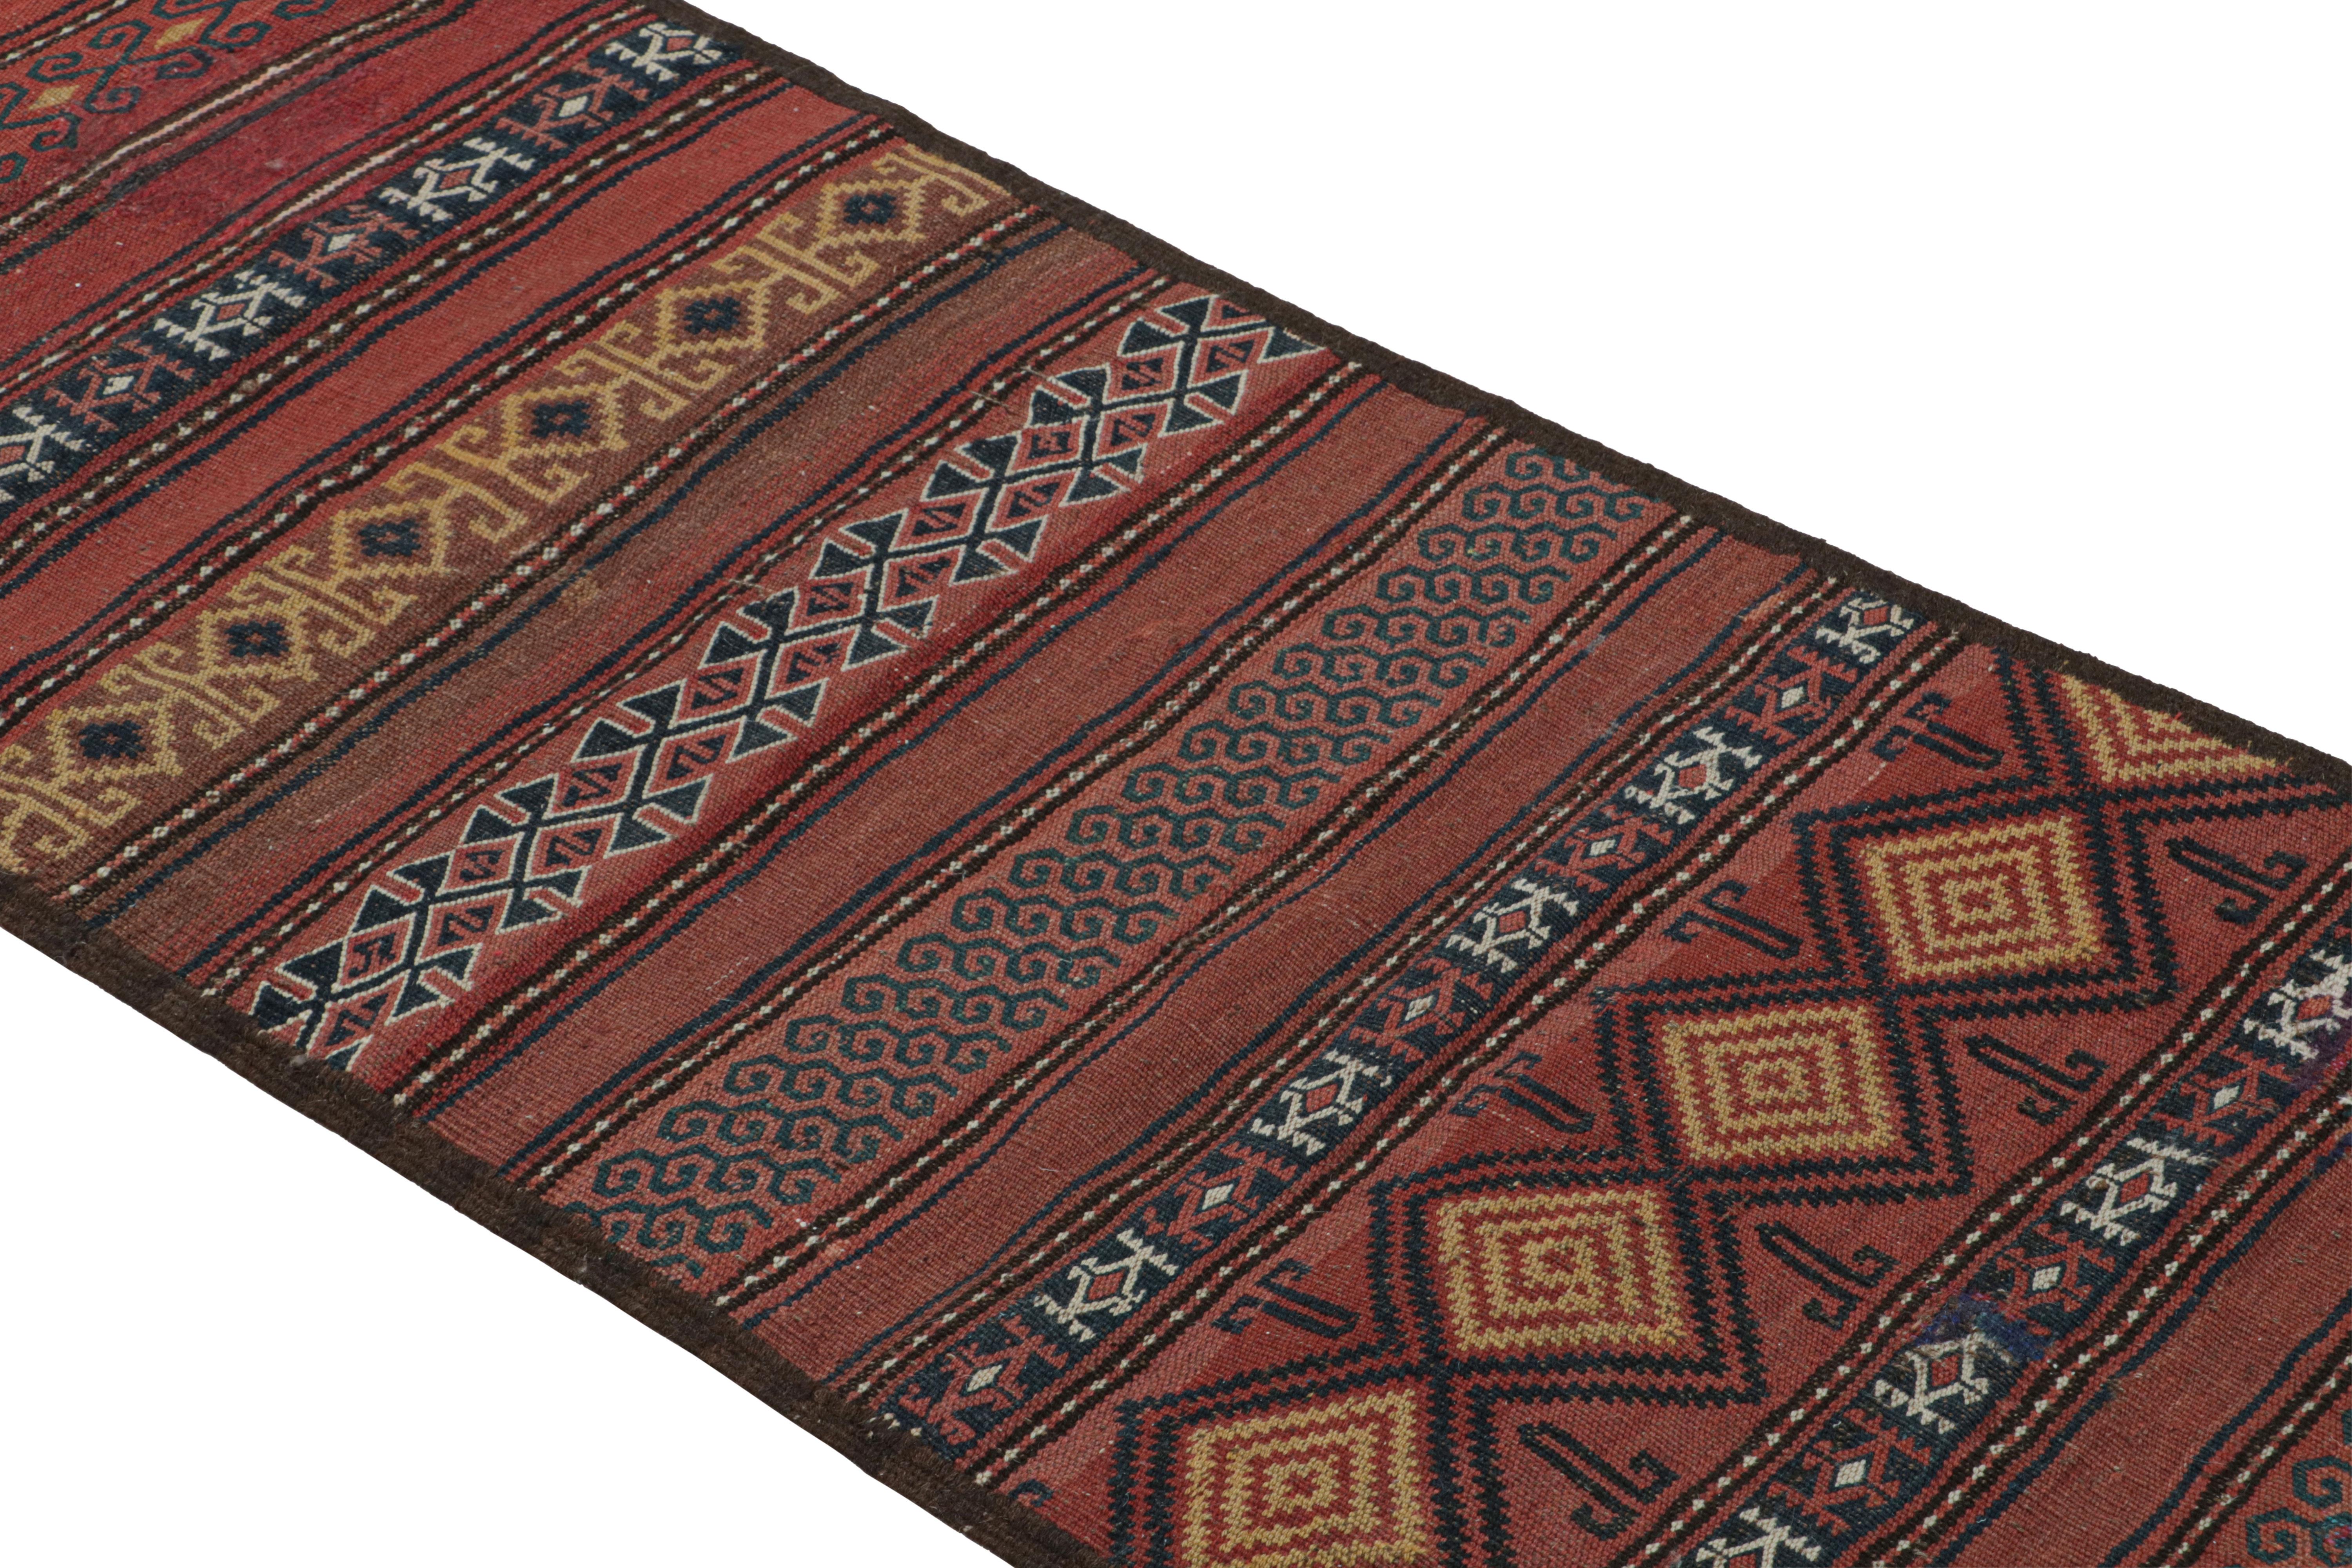 Made with handwoven in Turkey circa 1950-1960, this 2x9 vintage Kilim runner rug is a unique piece, which draws inspiration from Uzbek rug designs. 

On the Design: 

Brick red tones underscore a play of thin stripes and large geometric patterns,